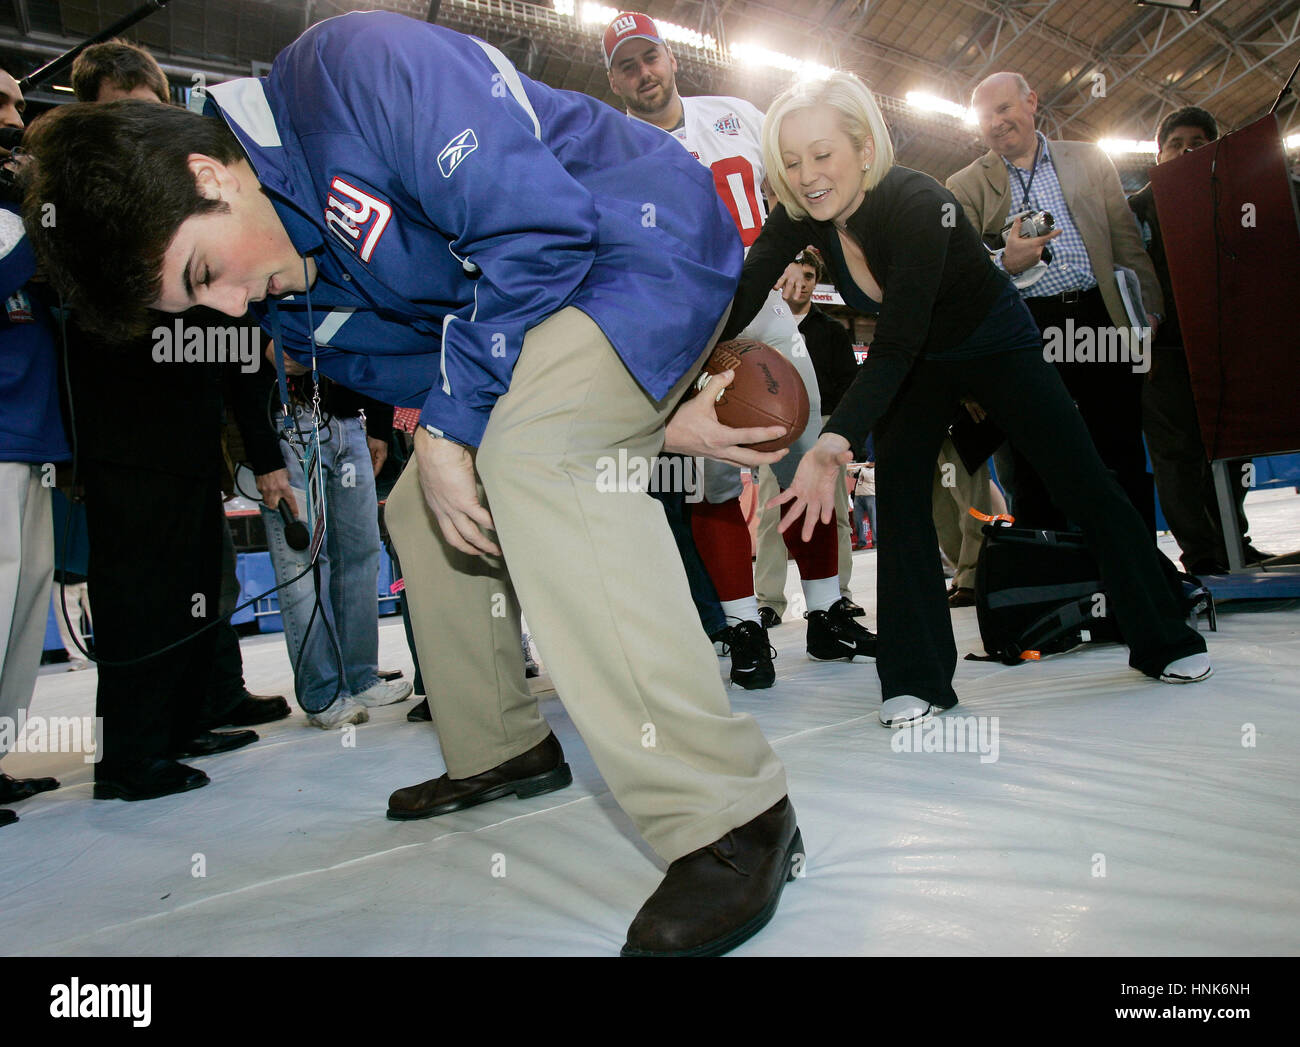 Giants center Shaun O'Hara (60) teaches former American Idol finalist Kellie Pickler how to receive a snap by Craig Falicon, left, during Media Day for Super Bowl XLII  at the University of Phoenix Stadium in Glendale, AZ, on Jan. 29, 2008.  Photo by Francis Specker Stock Photo